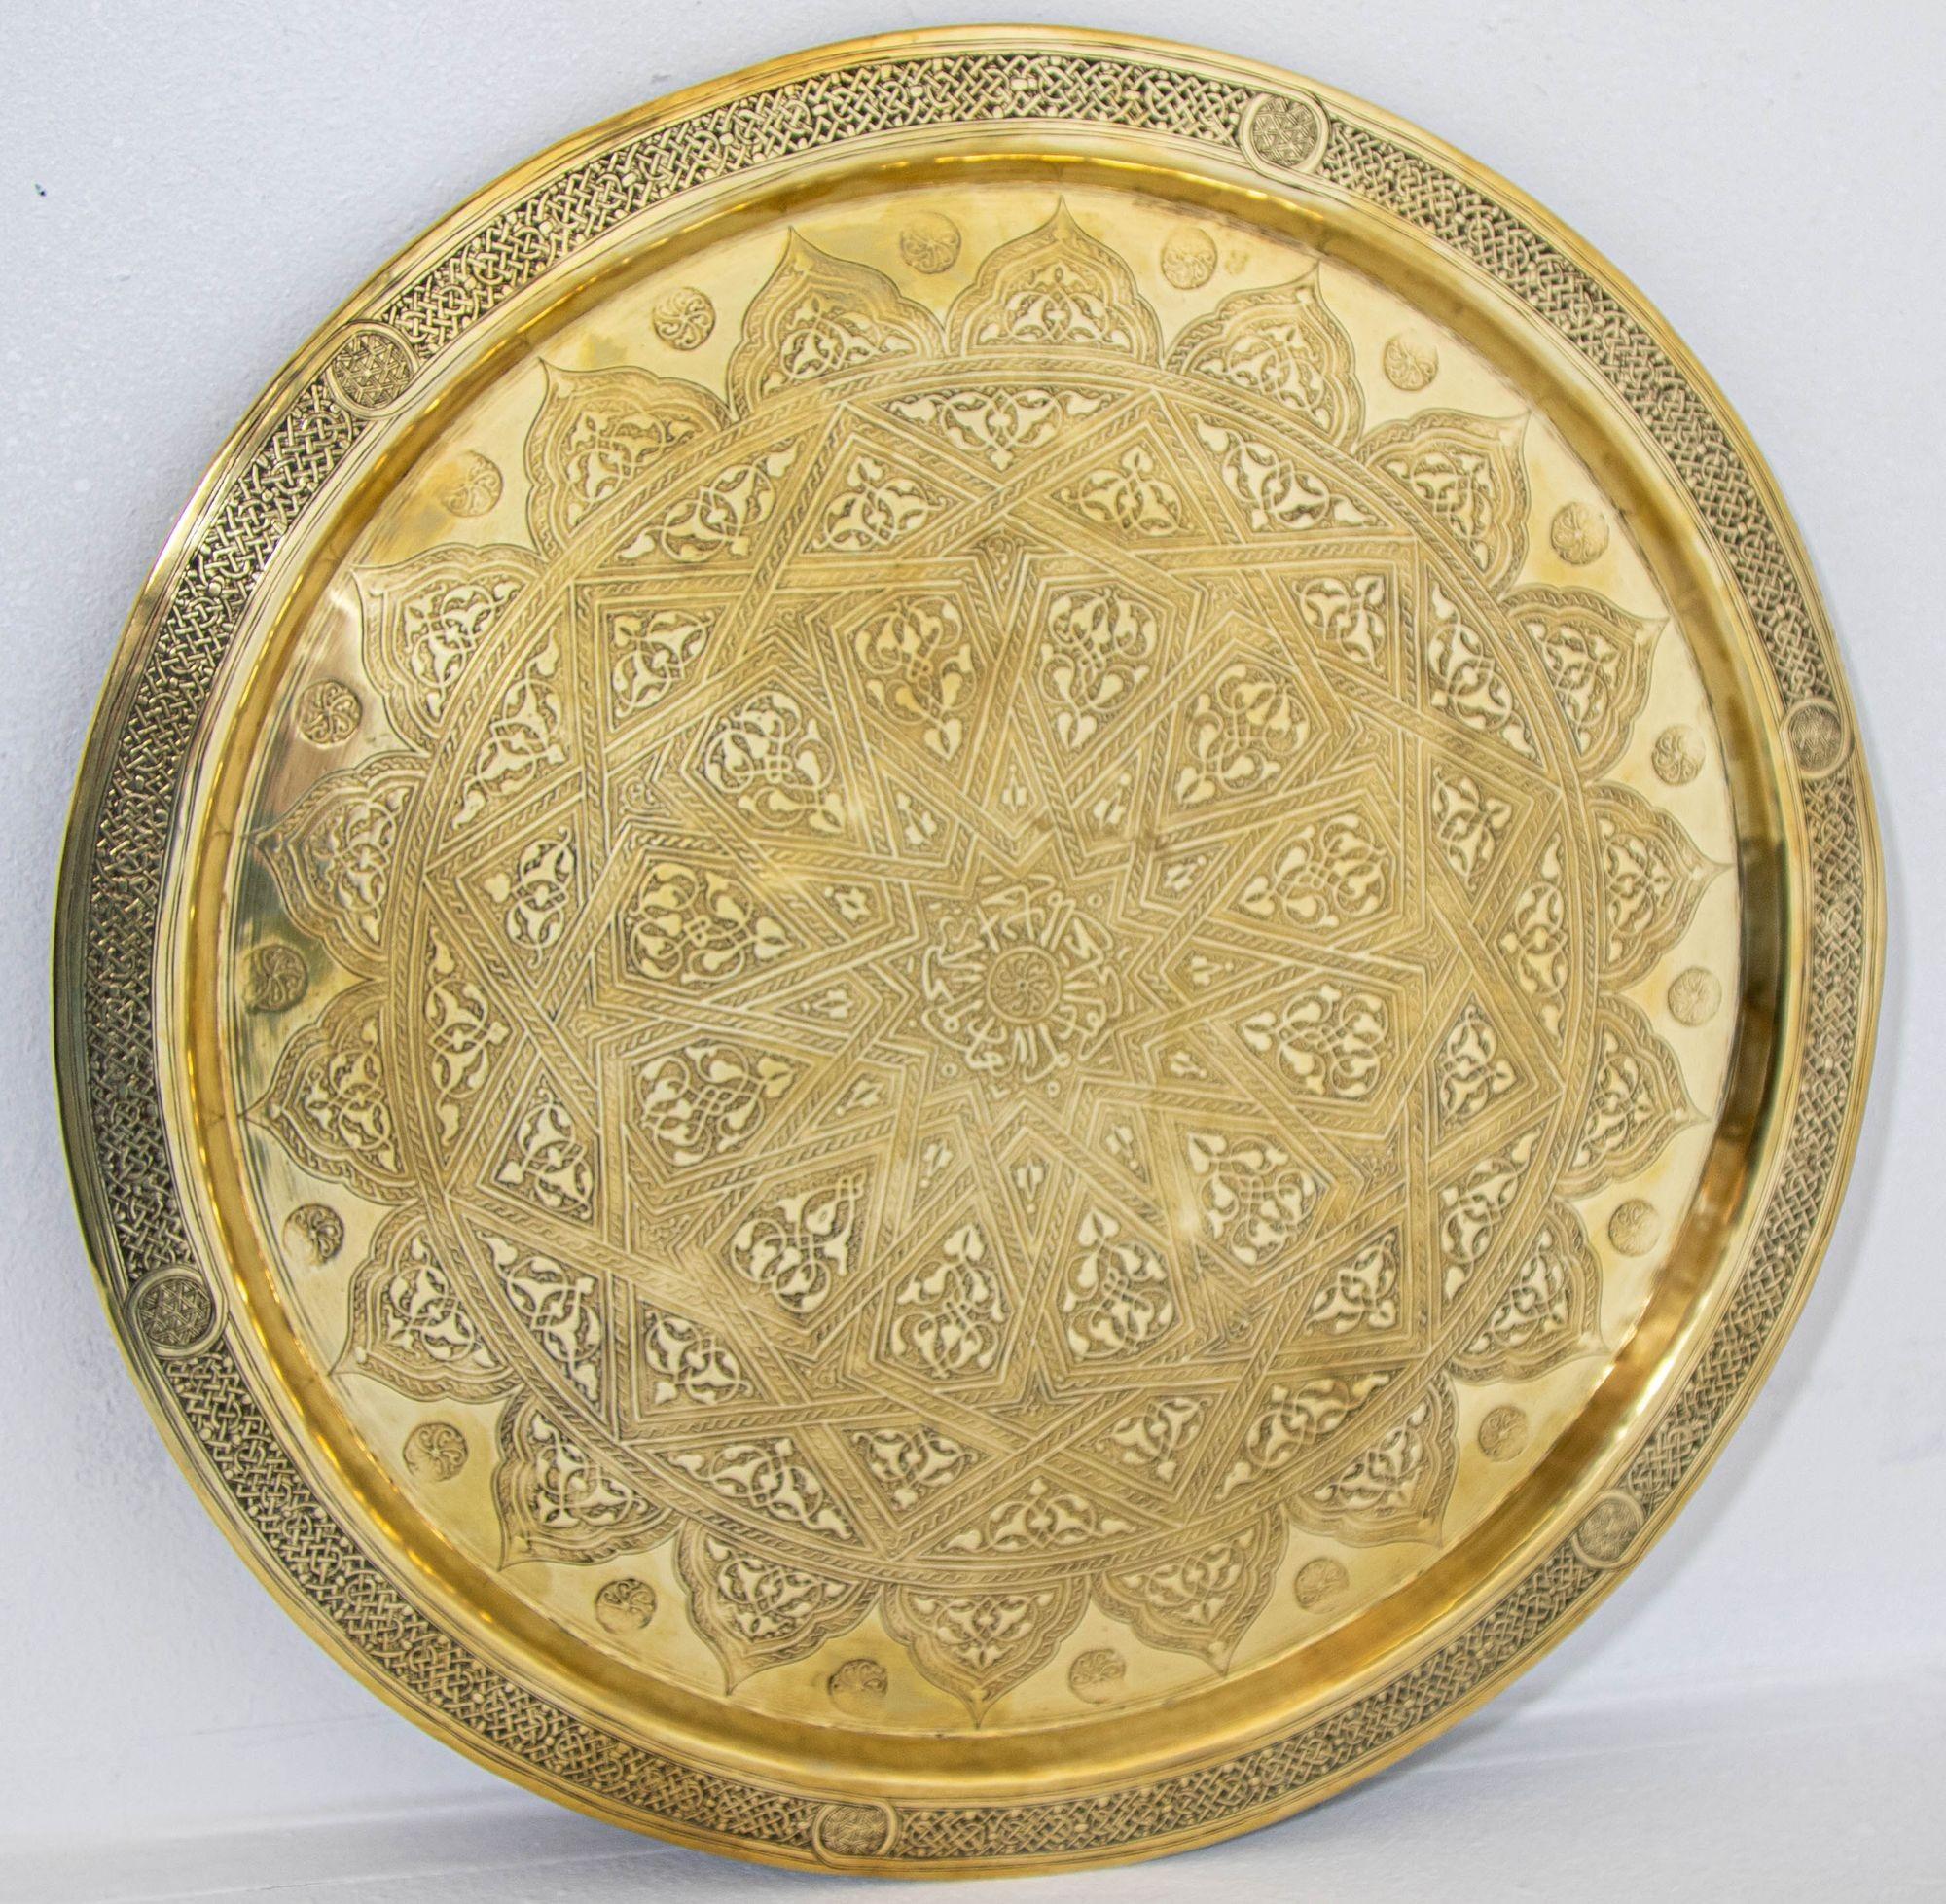 19th century Mughal Indo Persian fine antique brass round tray hand chased with Islamic calligraphy in Mameluke style in the center. 19th century clector museum quality piece Mughal India style Islamic Brass tray.A round pished tray from India,